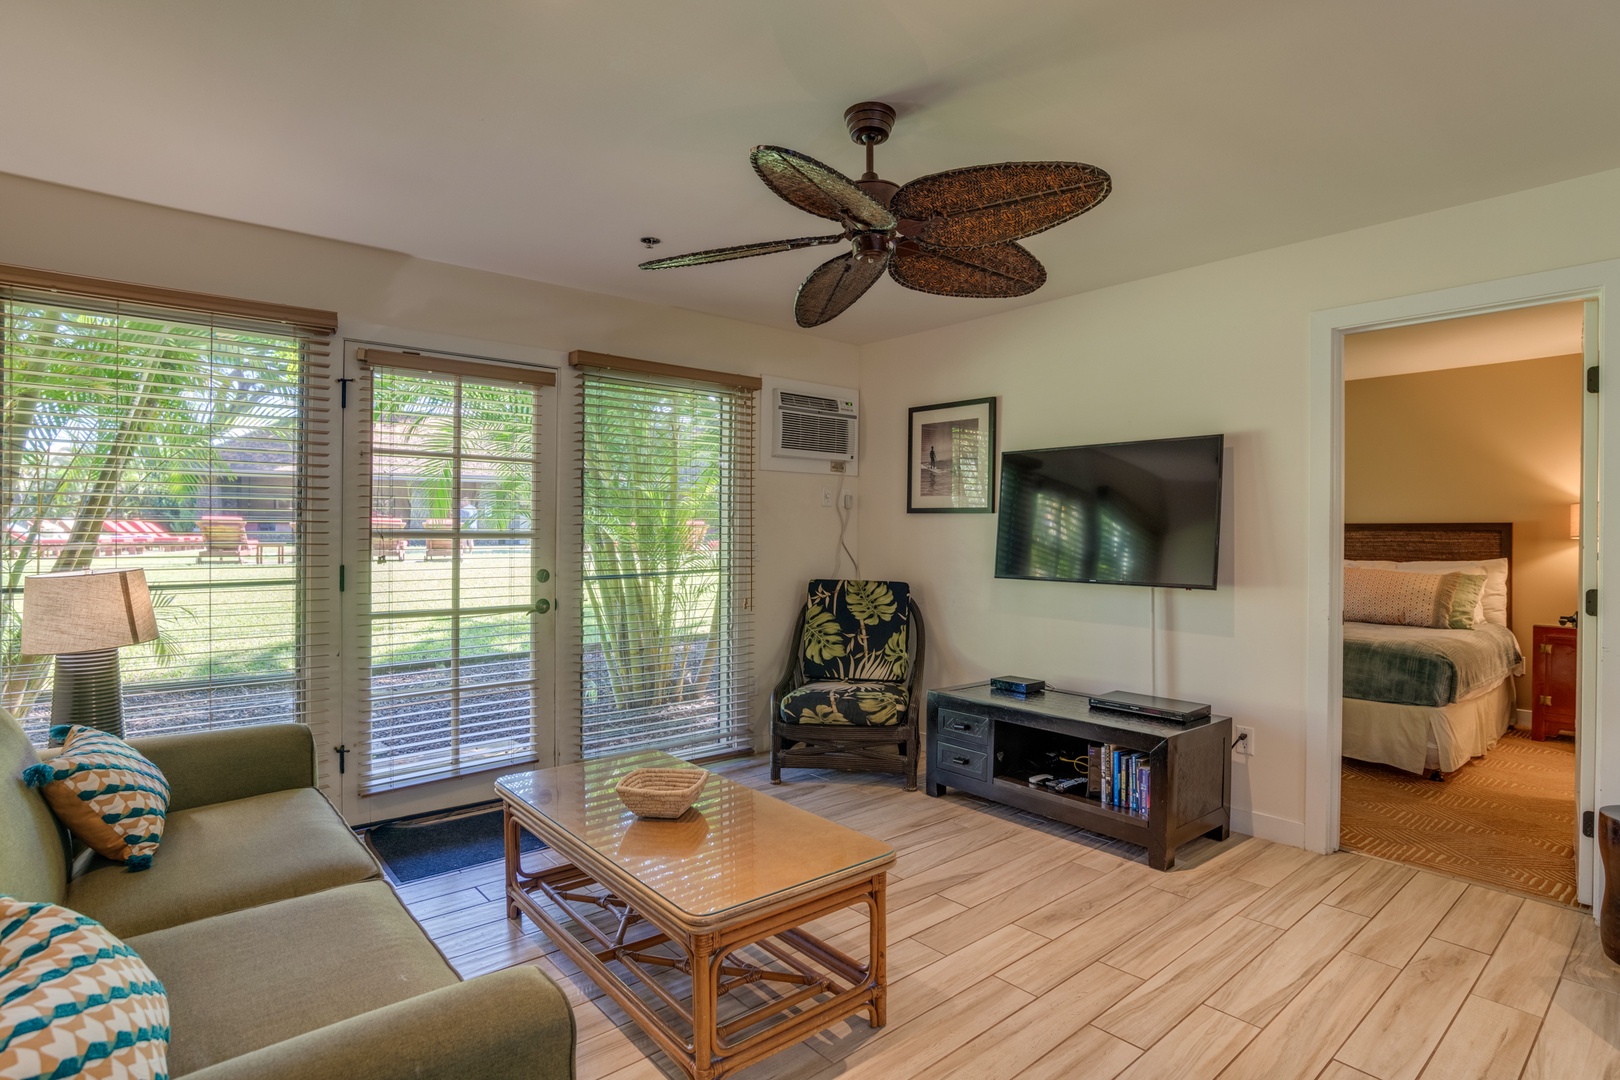 Lahaina Vacation Rentals, Aina Nalu D103 - Gather in the living area for a movie night or catch up on your favorite shows